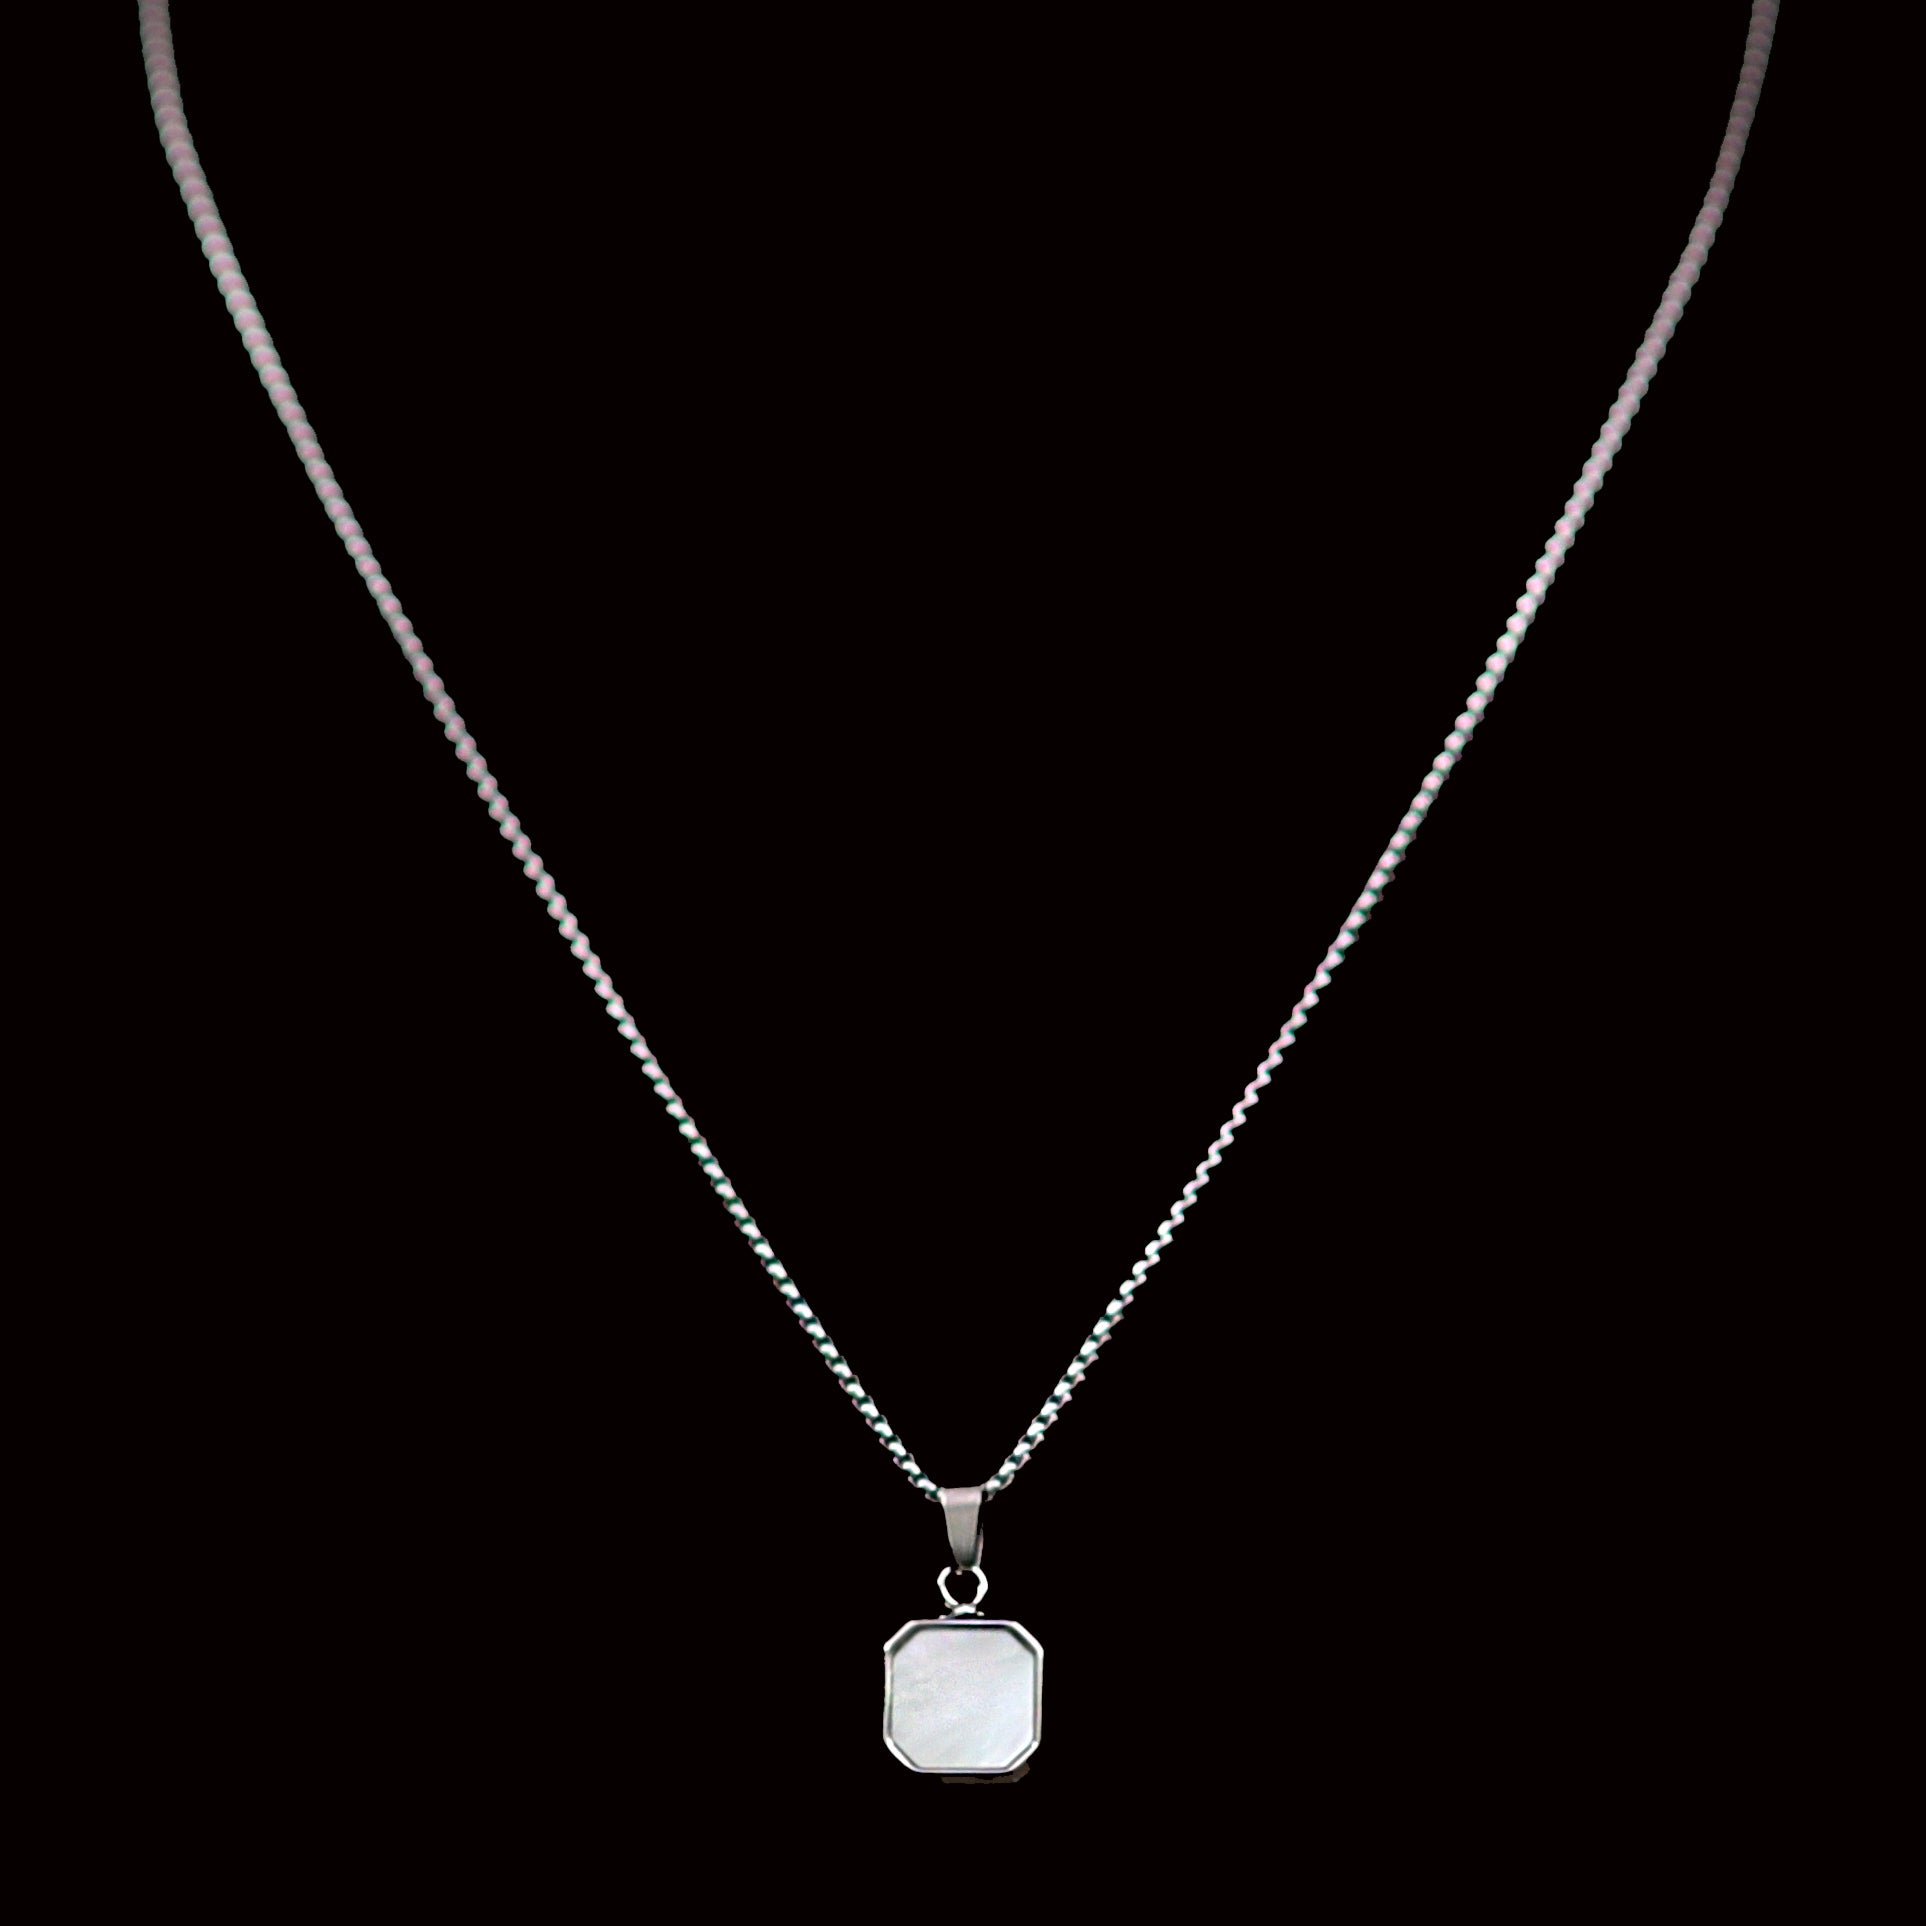 Carito Stainless Steel Box Chain Necklace with Square Stone Pendant